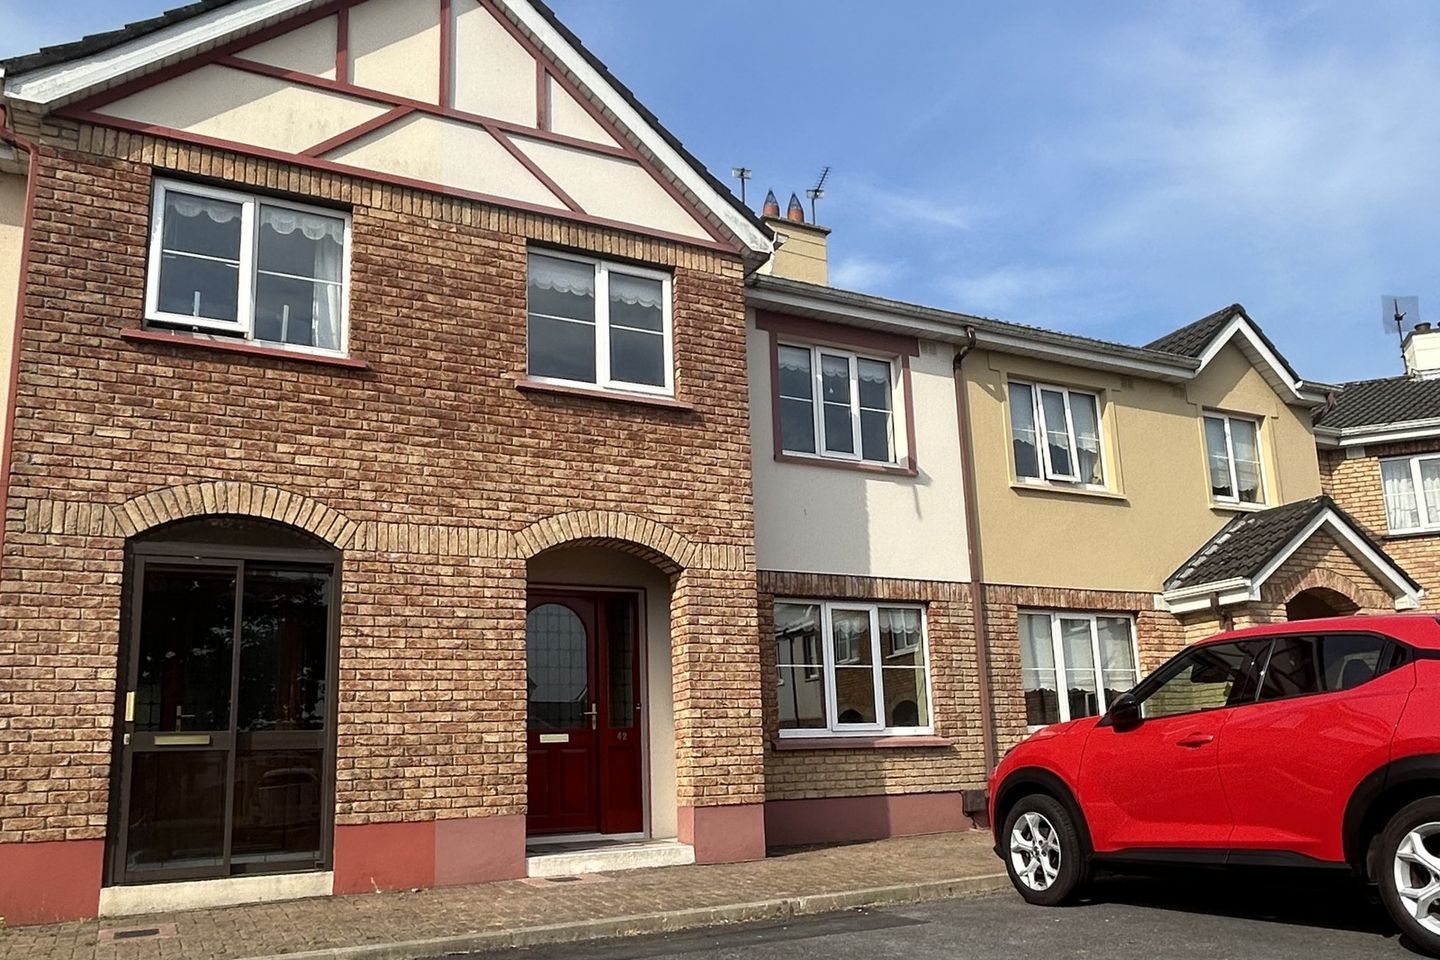 42 Station Court, Ennis, Co. Clare